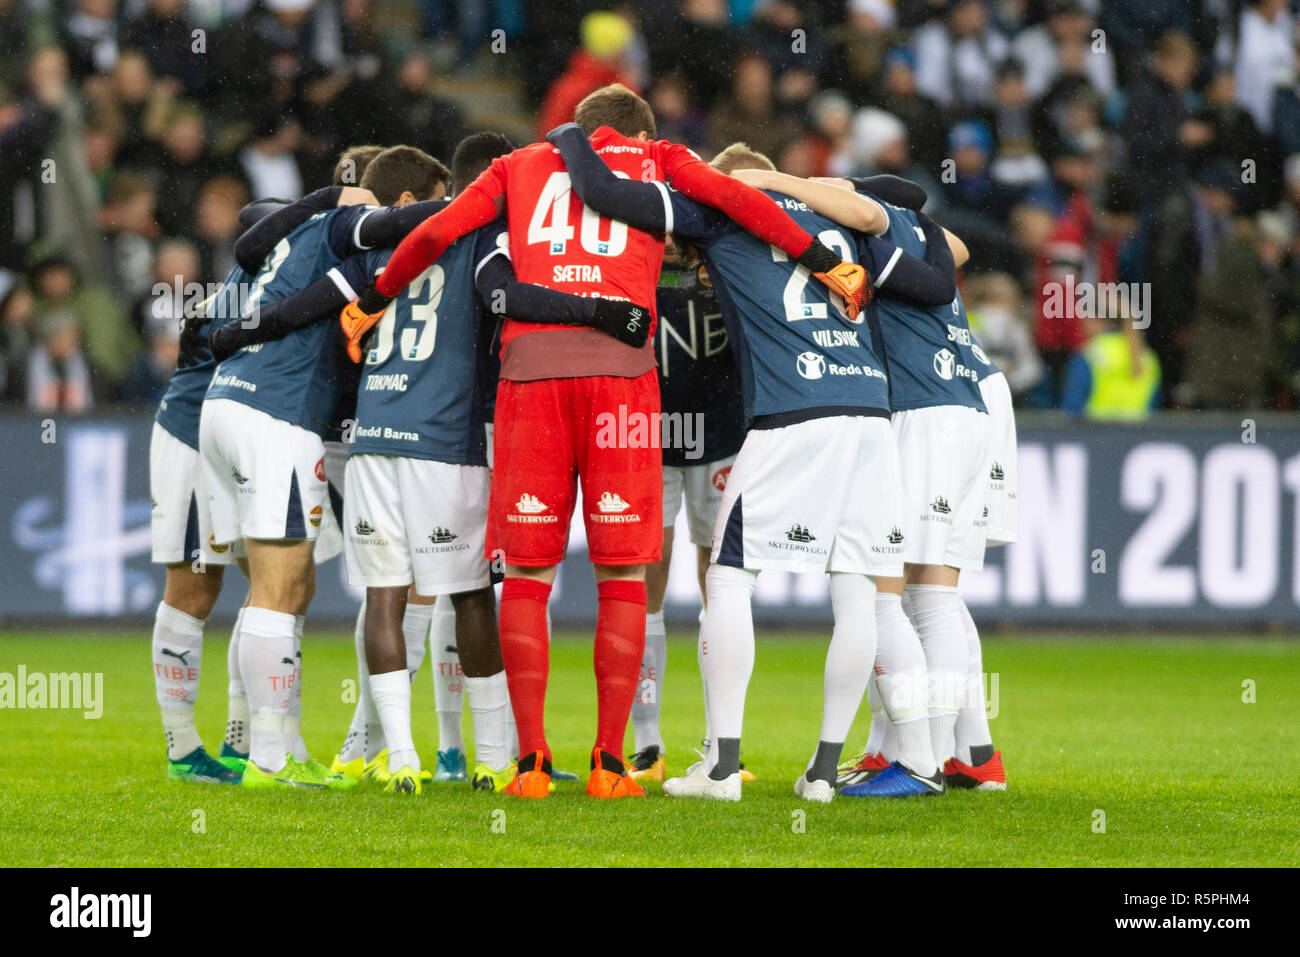 Norway, Oslo. 2nd Dec 2018. The players from Strømsgodset stand together before the Norwegian Cup Final 2018 between Rosenborg and Strømsgodset at Ullevaal Stadion in Oslo. (Photo credit: Gonzales Photo - Jan-Erik Eriksen). Credit: Gonzales Photo/Alamy Live News Stock Photo